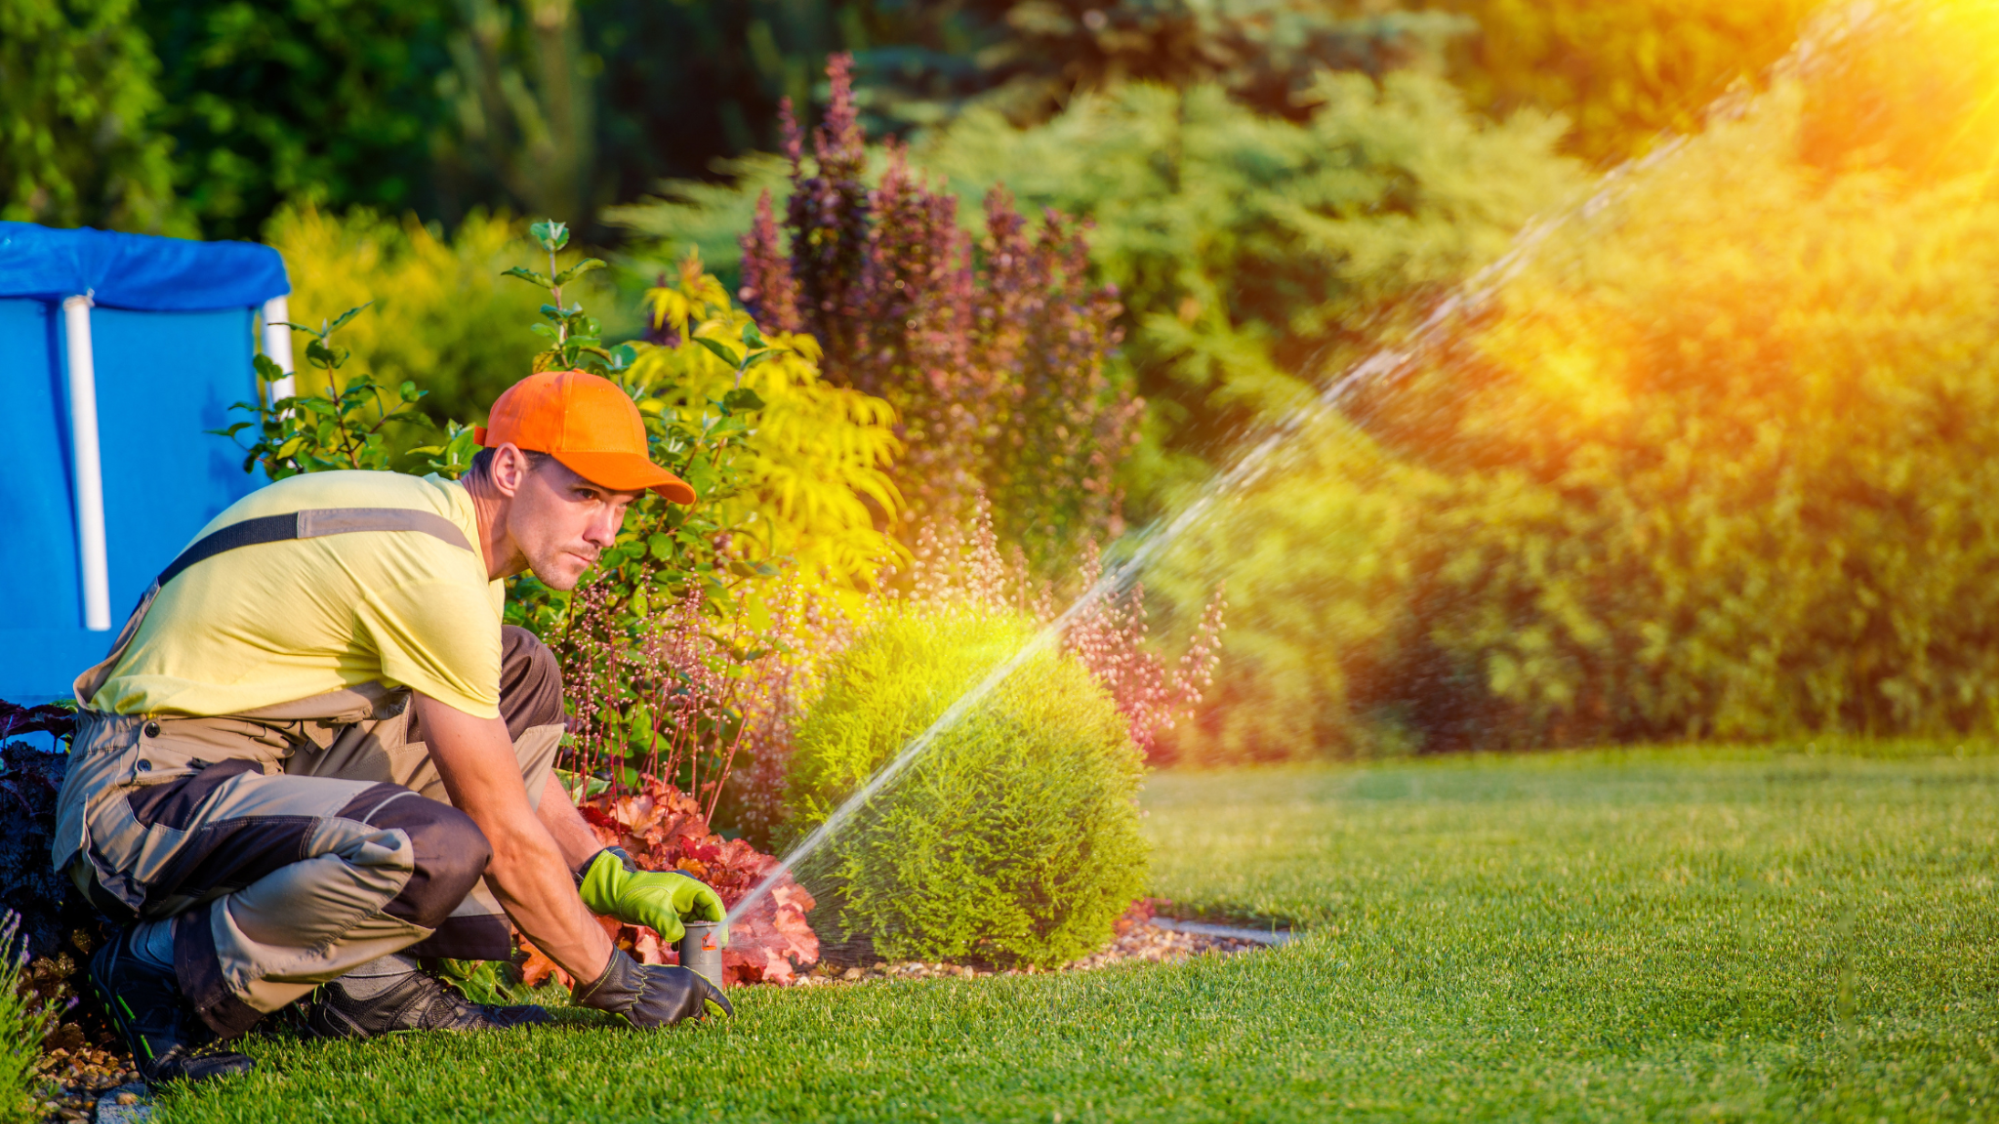 Common Sprinkler System Issues and Their Simple Solutions